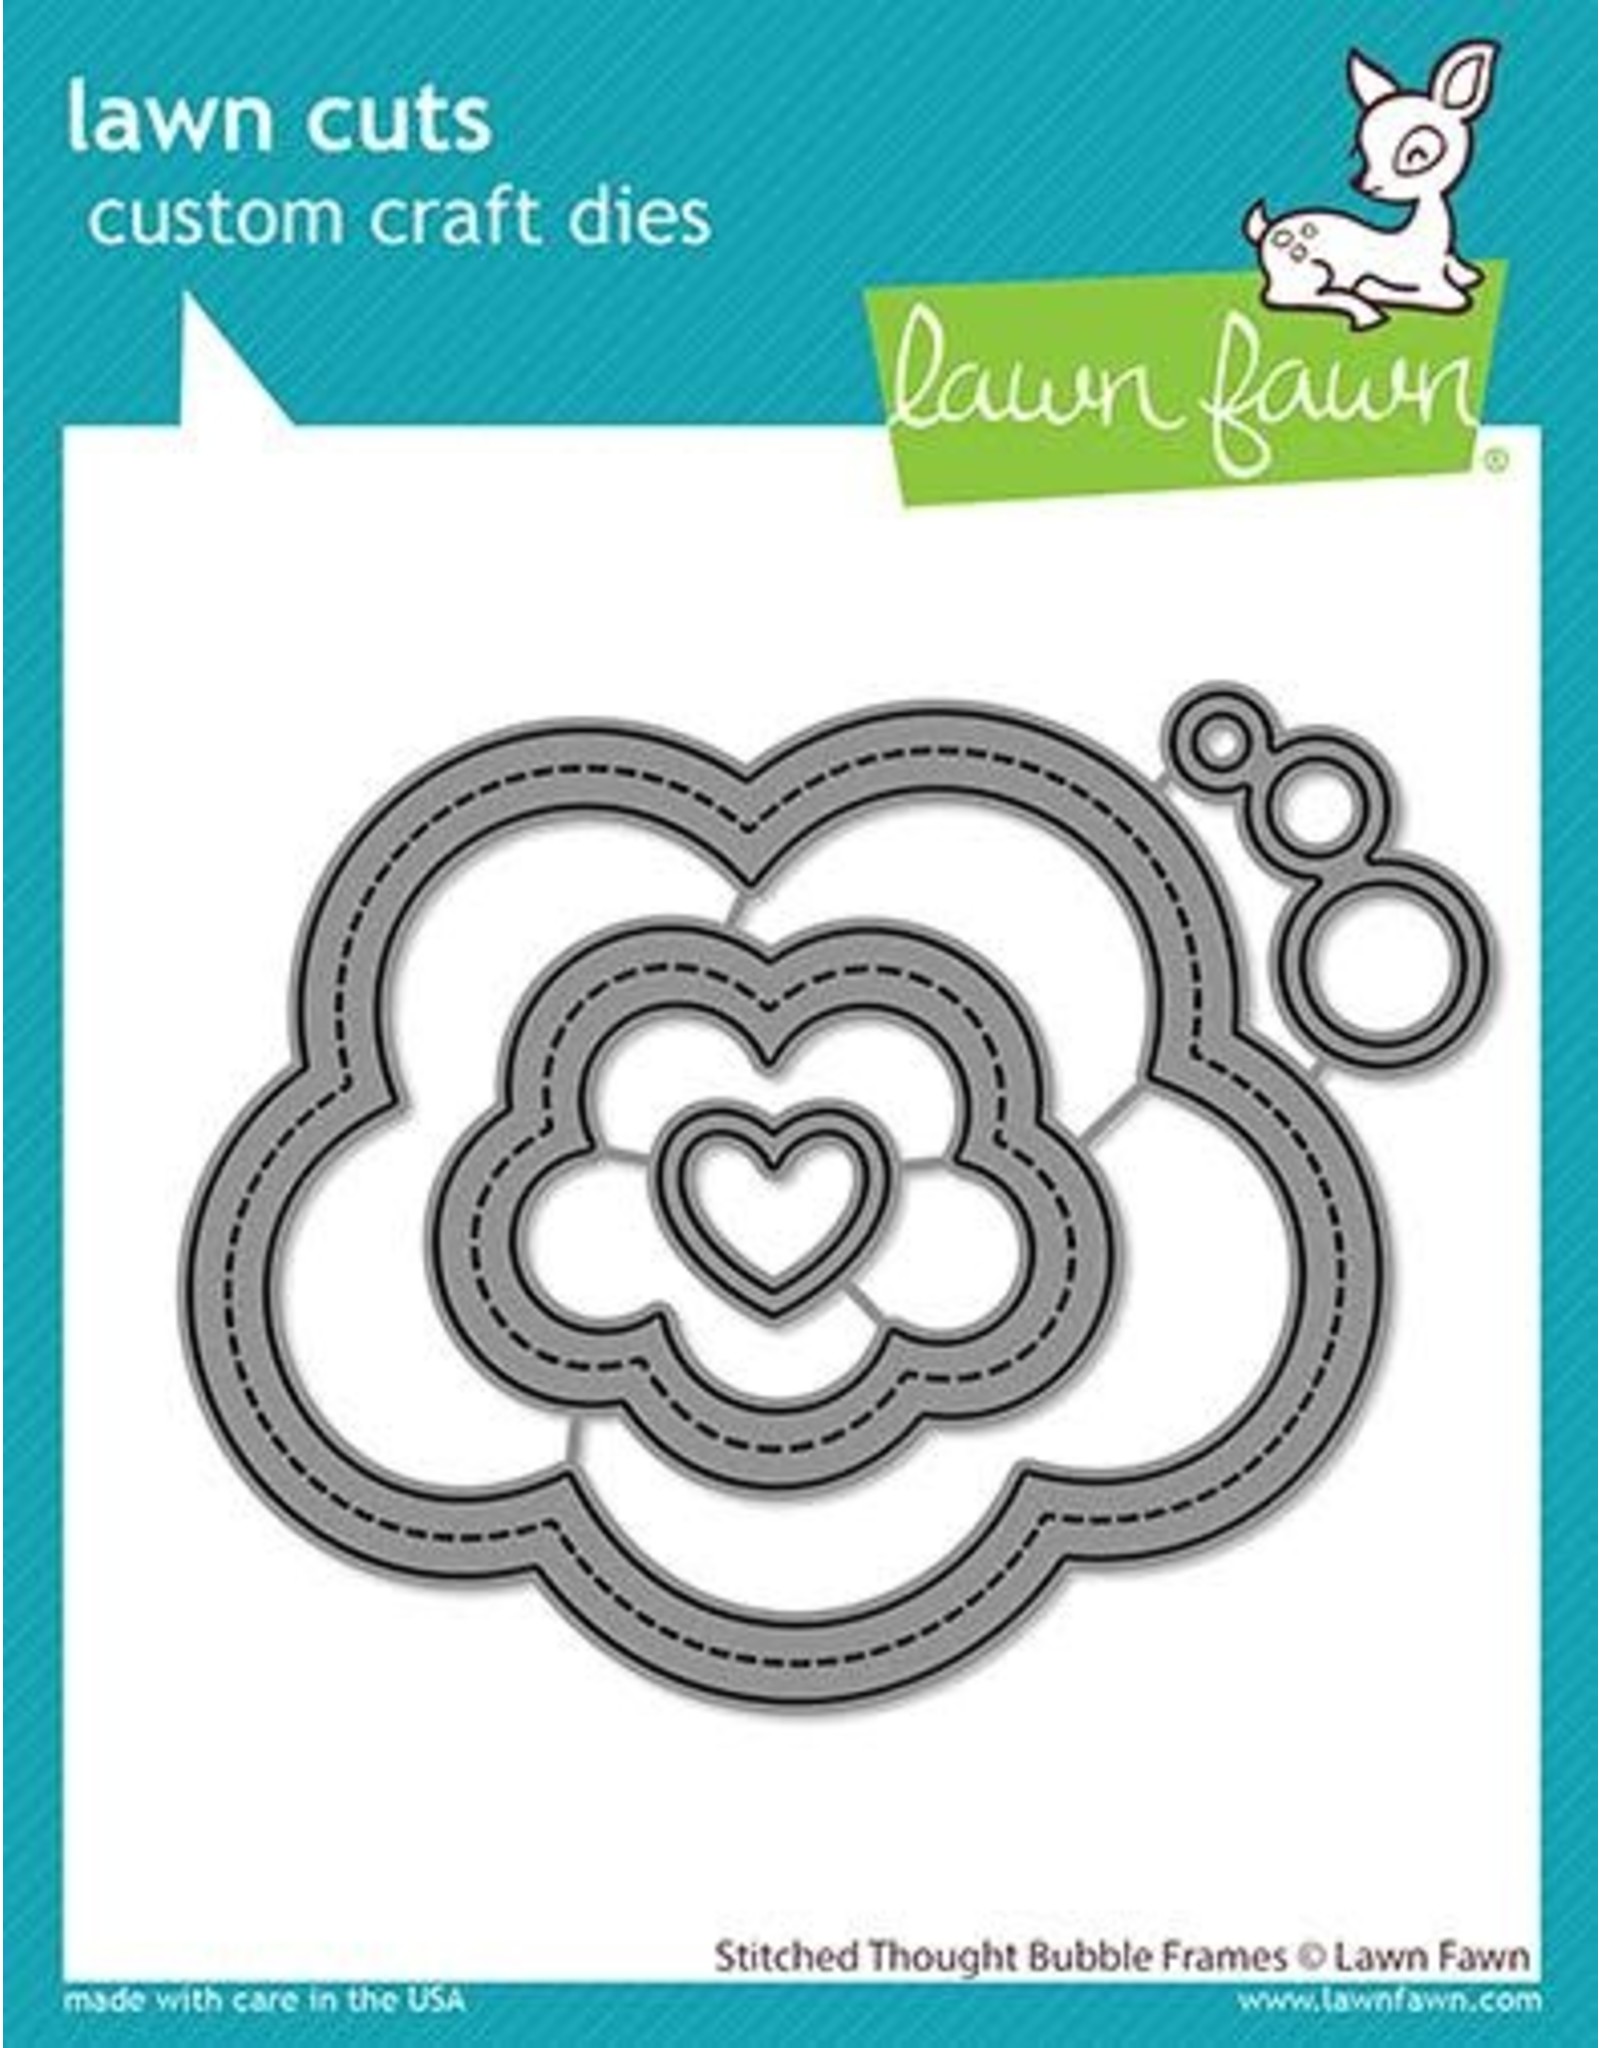 LAWN FAWN LAWN FAWN STITCHED THOUGHT BUBBLE FRAMES DIE SET